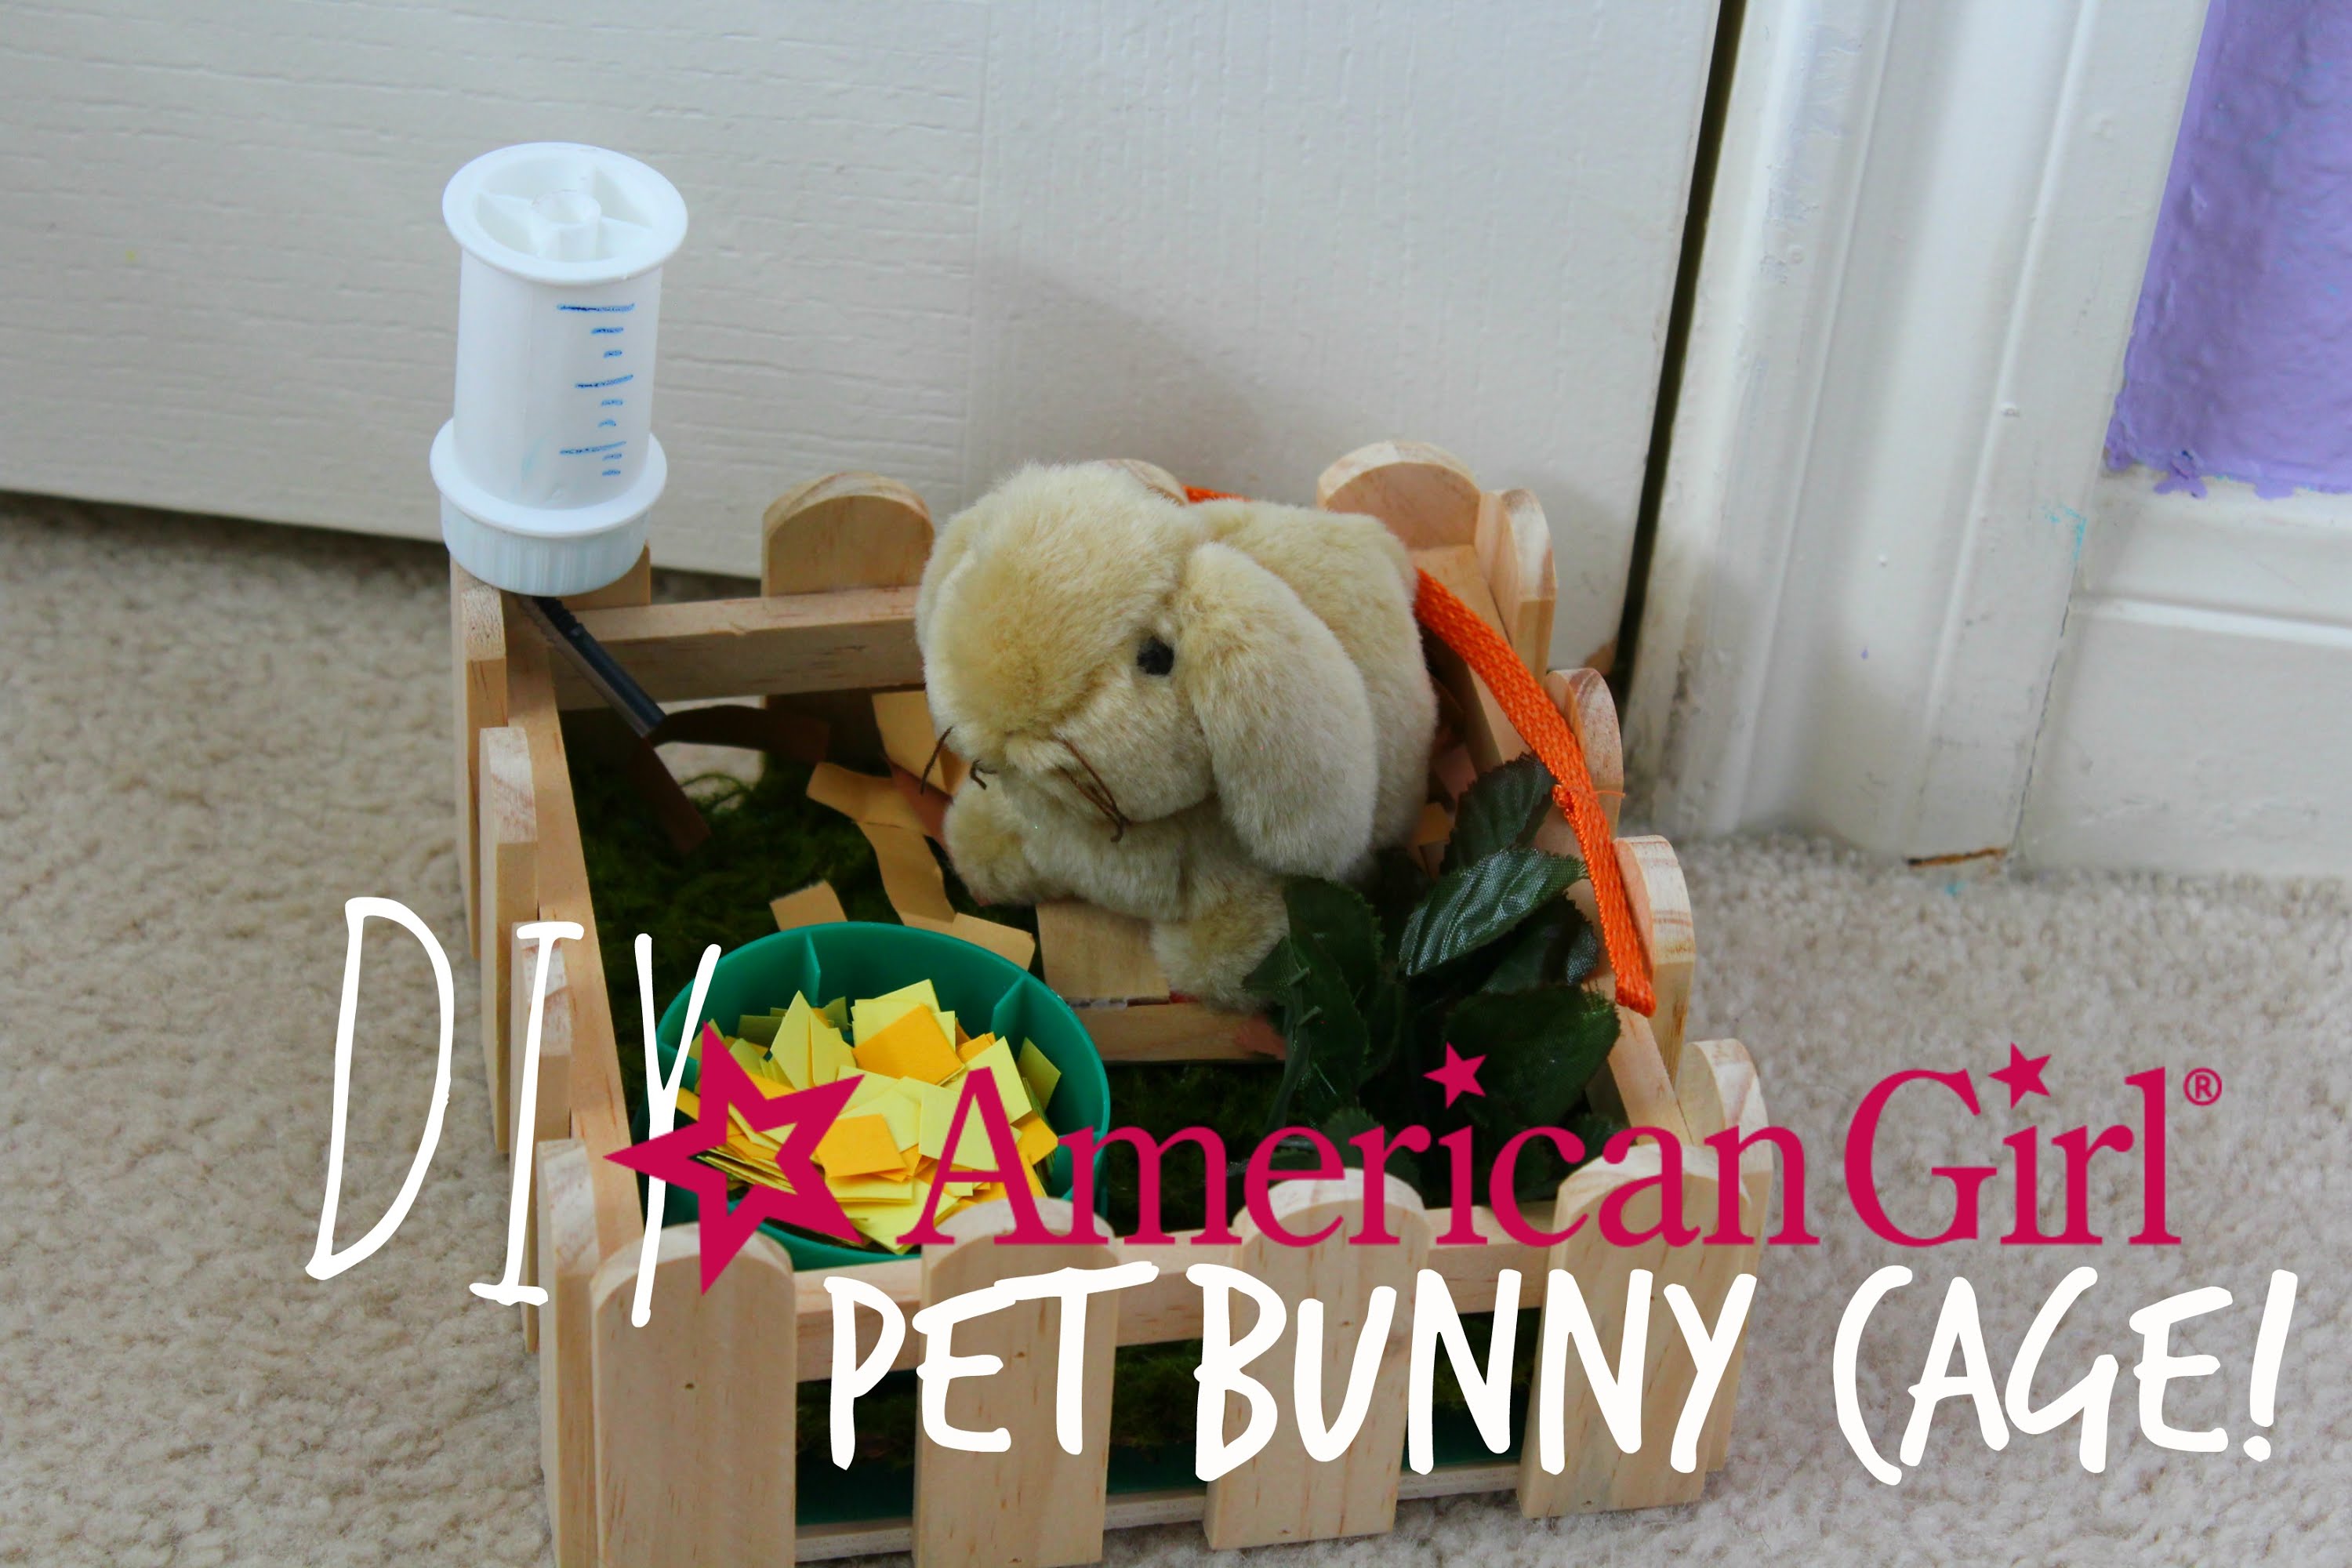 American Girl Doll Pet Bunny Cage Tutorial! - YouTube